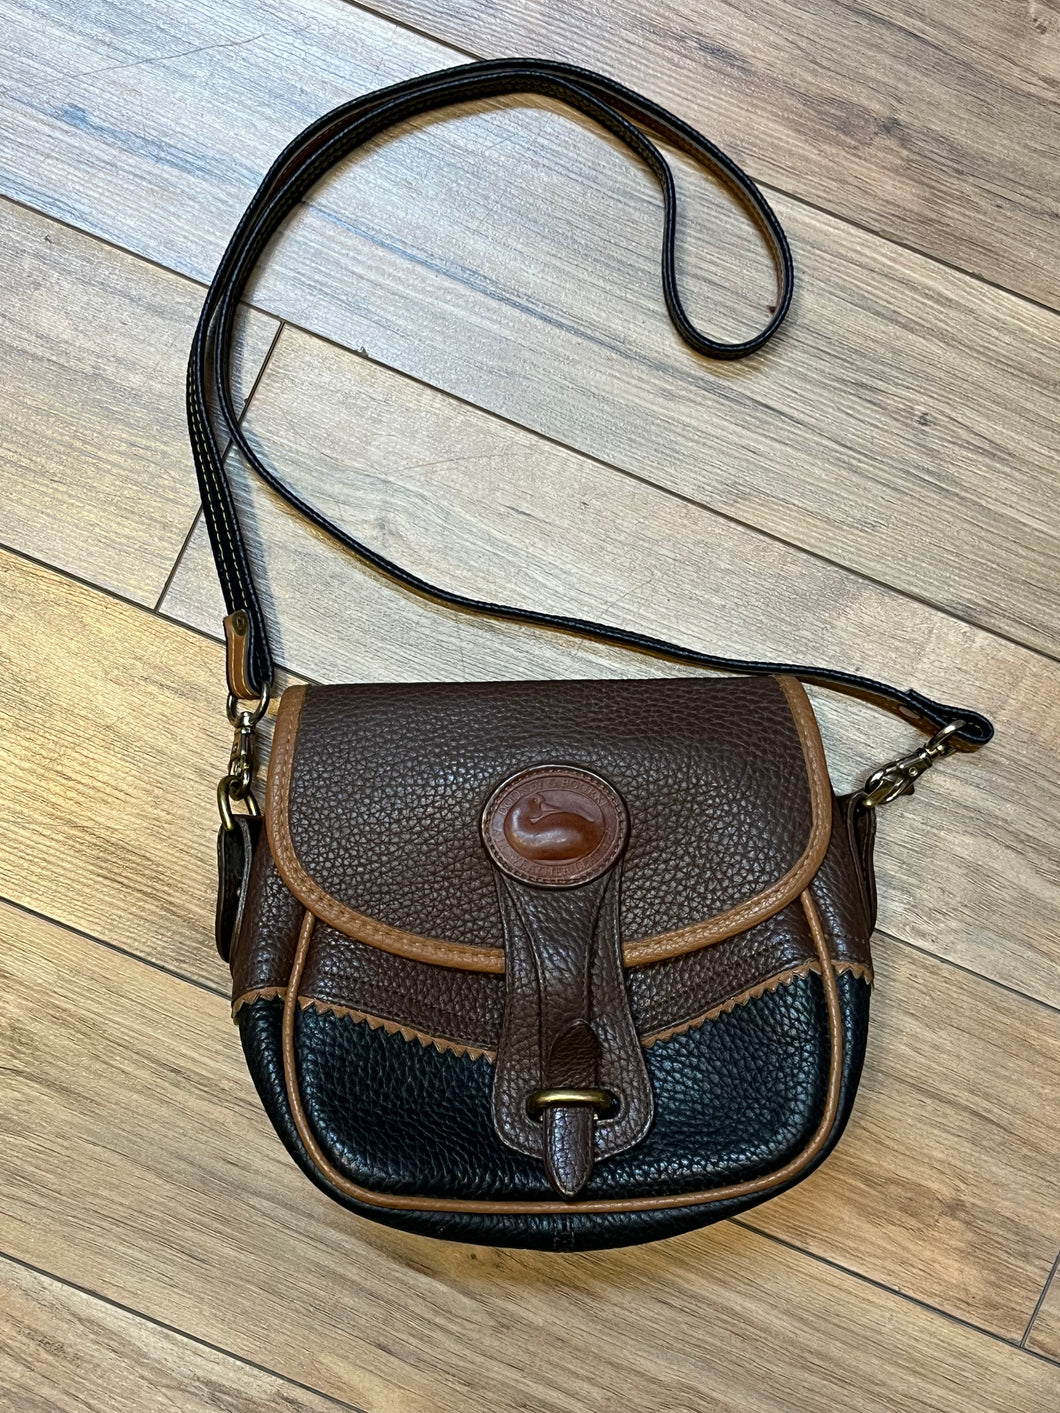 Dooney and Burke small navy and brown pebble leather crossbody bag with multiple pockets and brass hardware.